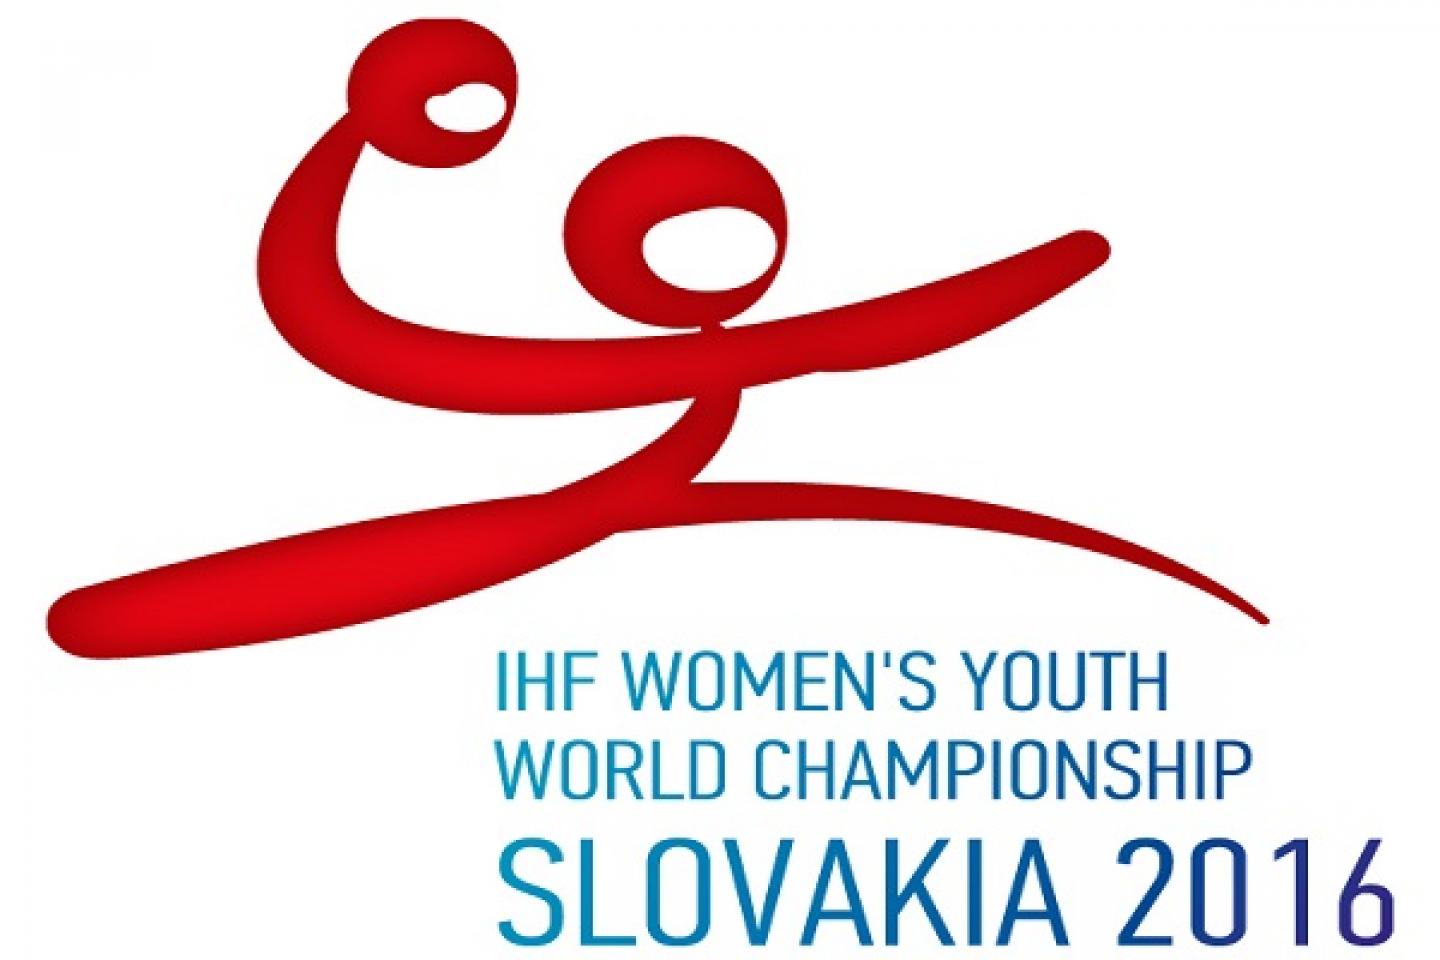 Slovakia 2016 – Match Schedule released